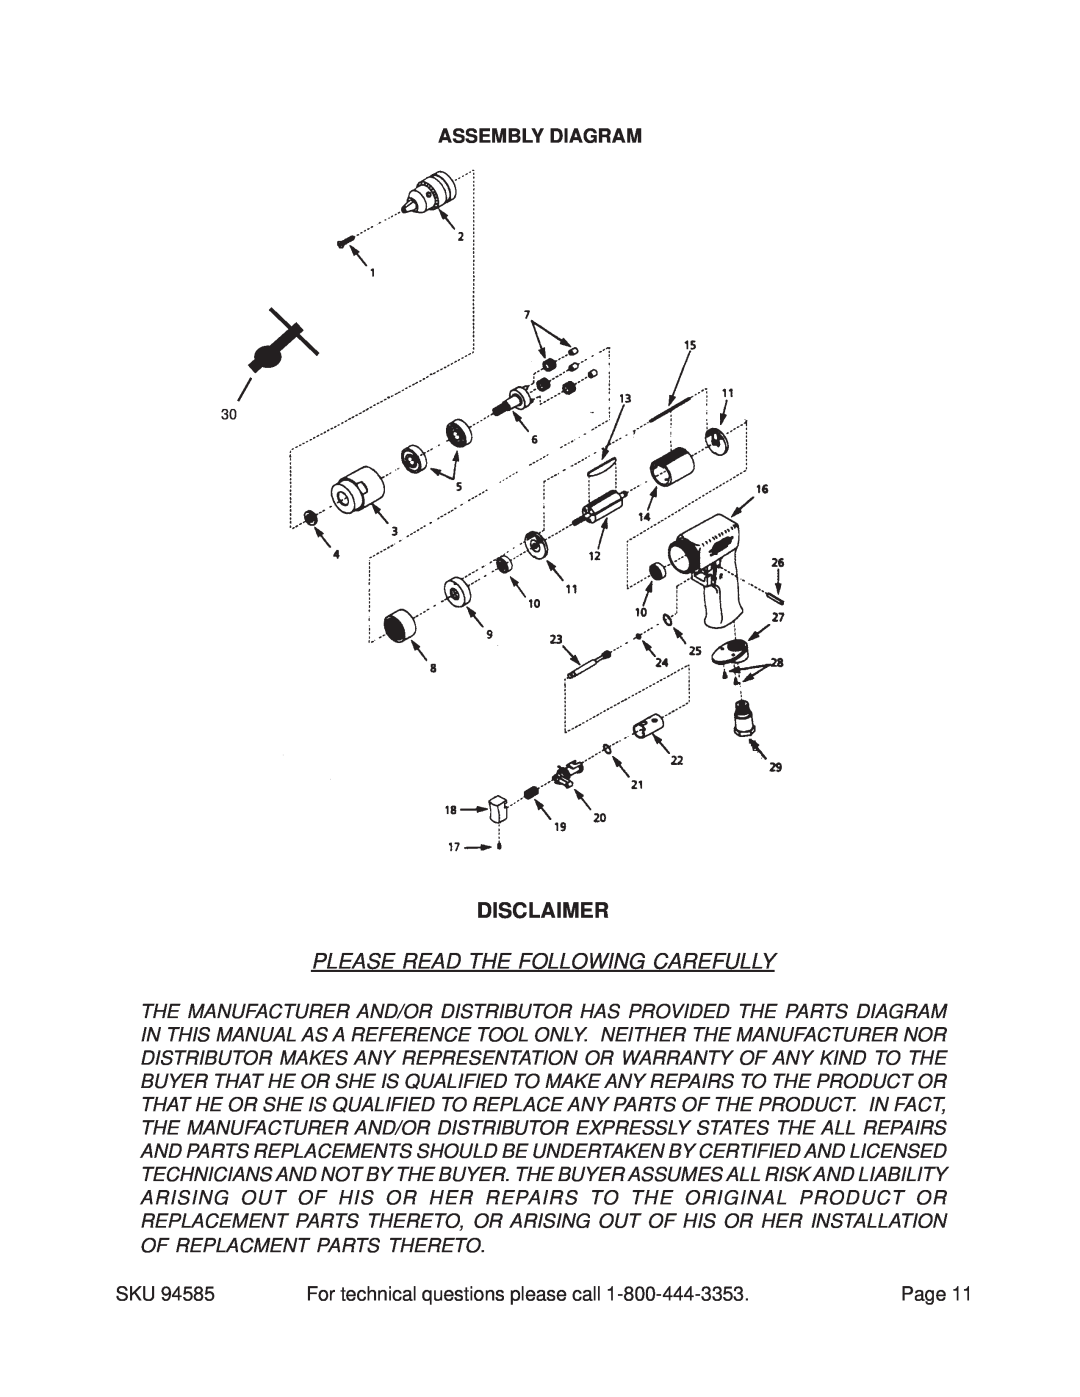 Harbor Freight Tools 94585 operating instructions Disclaimer, Please Read The Following Carefully, Assembly Diagram, Page 